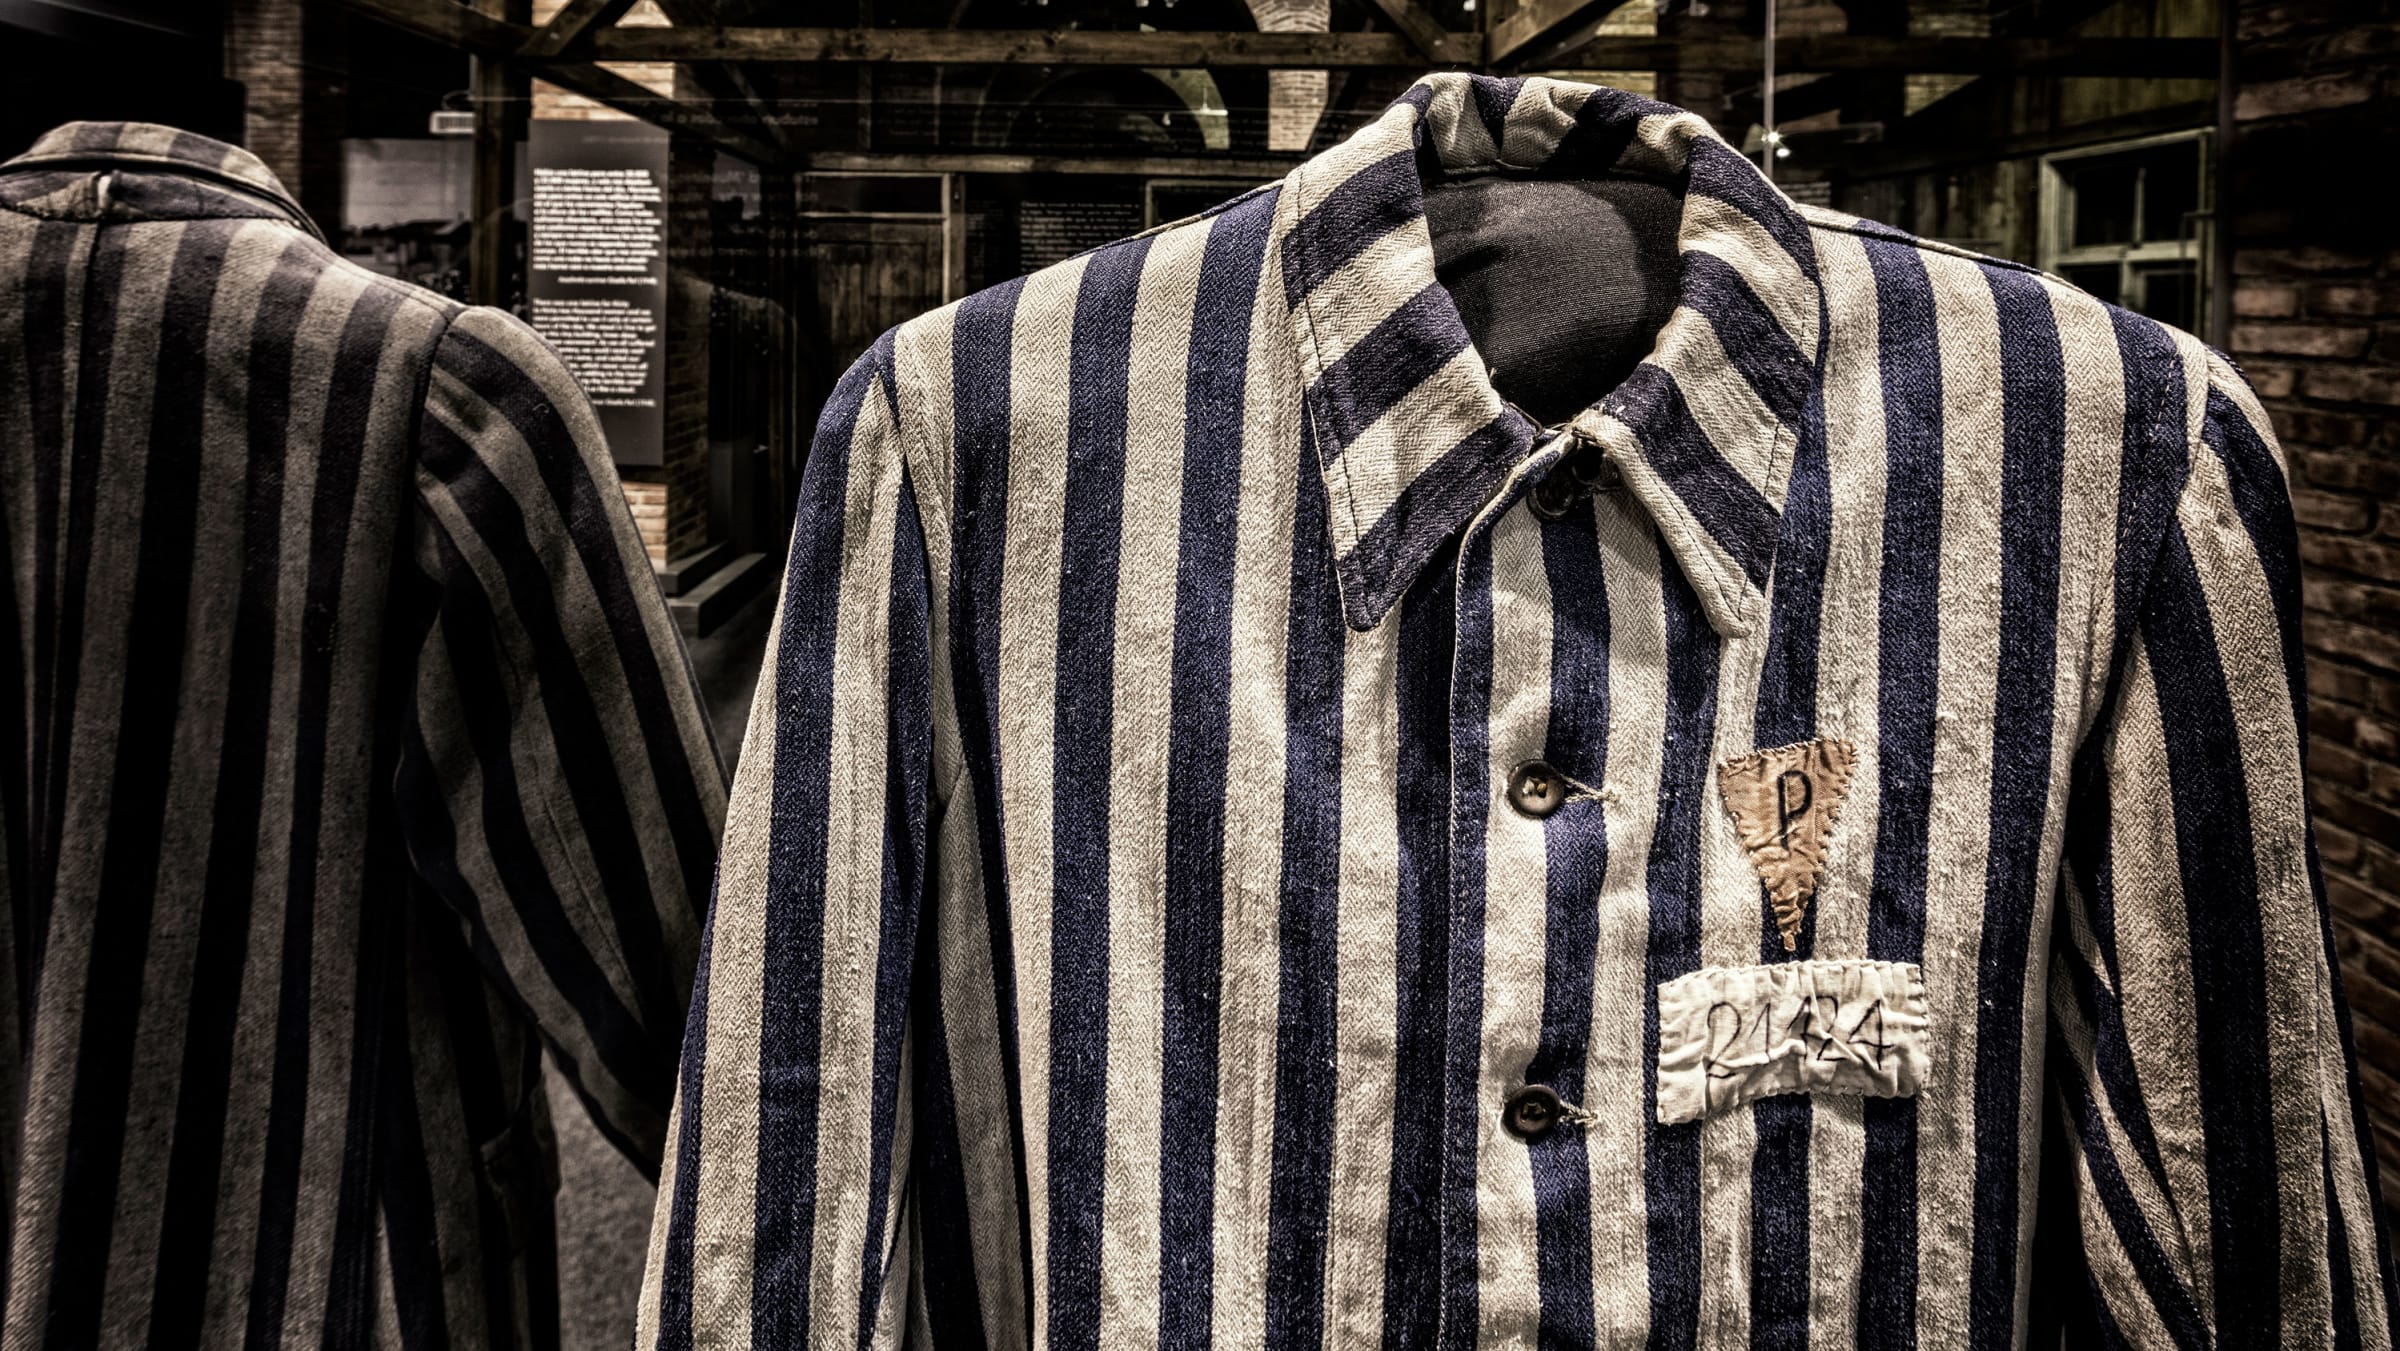 Nazi Horrors Of Auschwitz This Exhibit Reveals What It Was Like